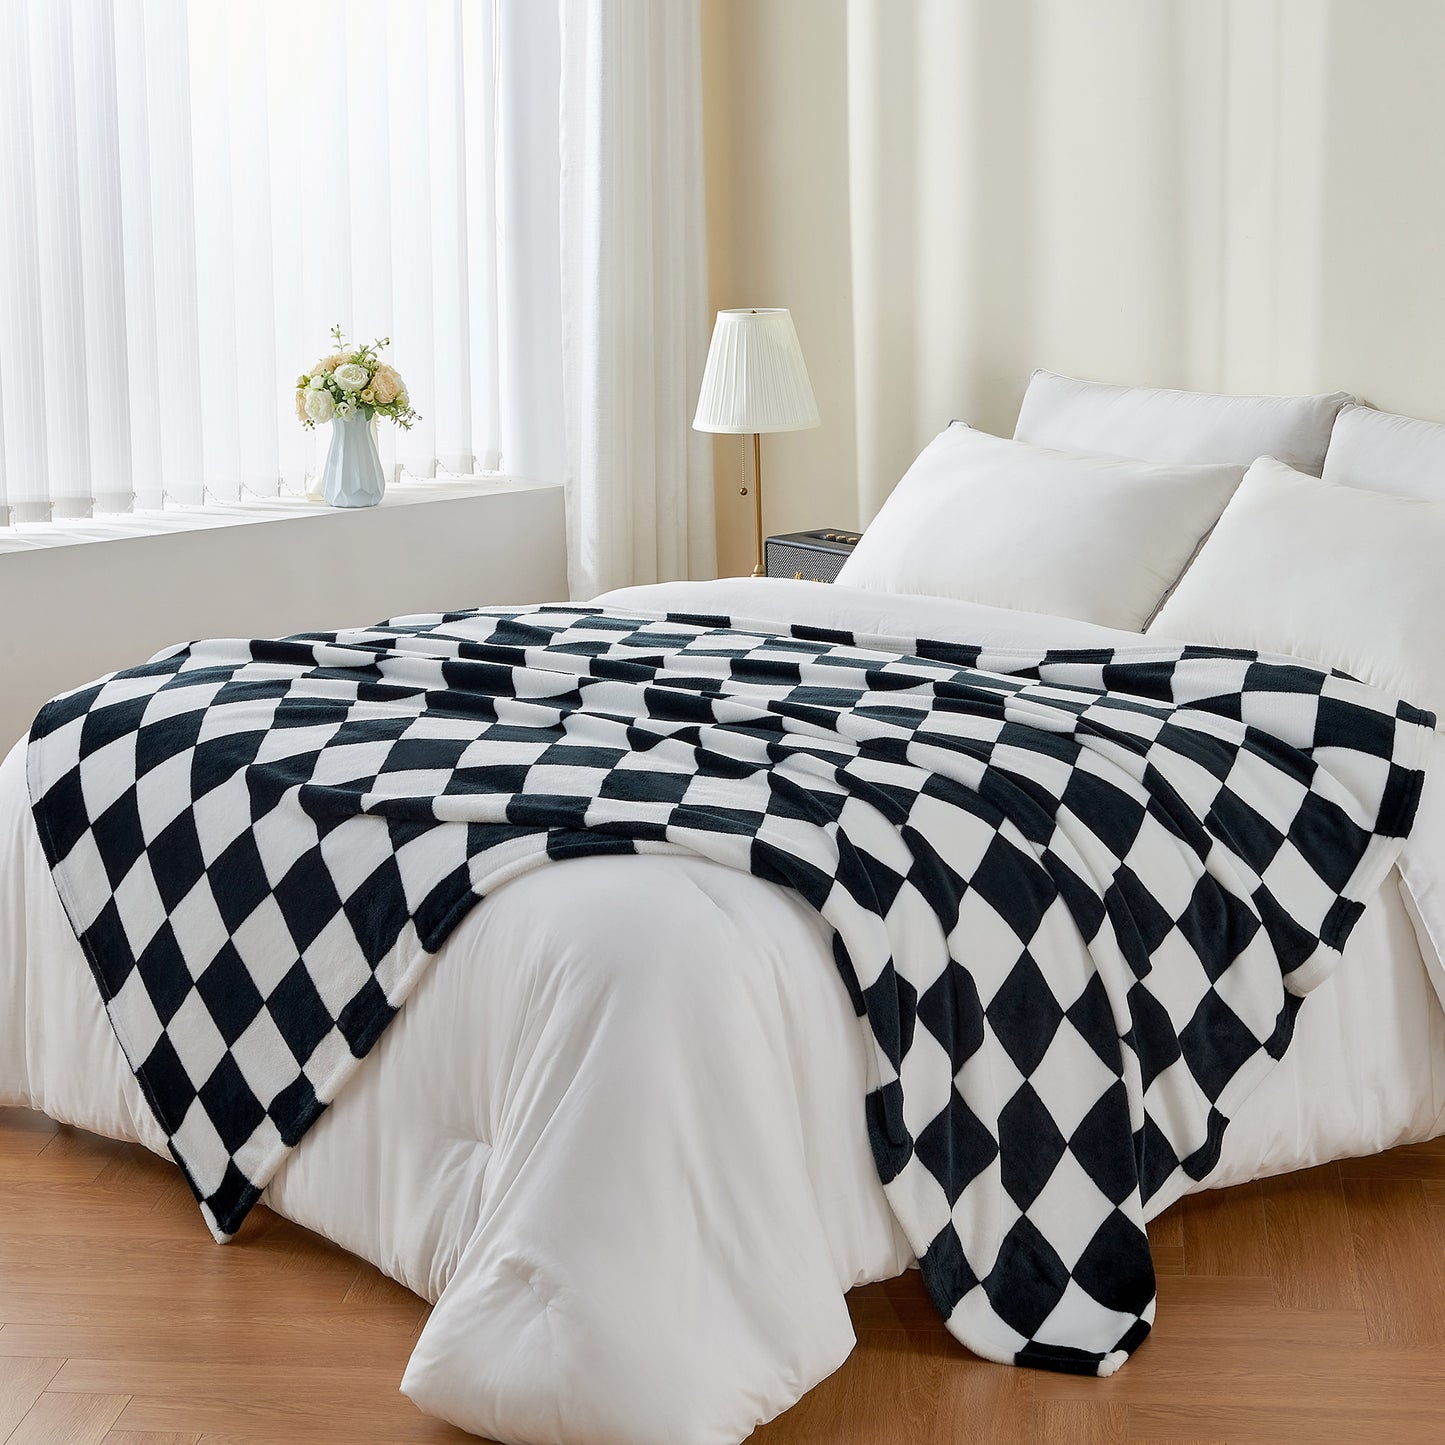 Checkered Throw Blanket for Couch and Bed, Luxurious Decorative Fleece Blanket with Checkerboard Grid Home Decor, Soft and Cozy Throw Blanket for Spring and Summer